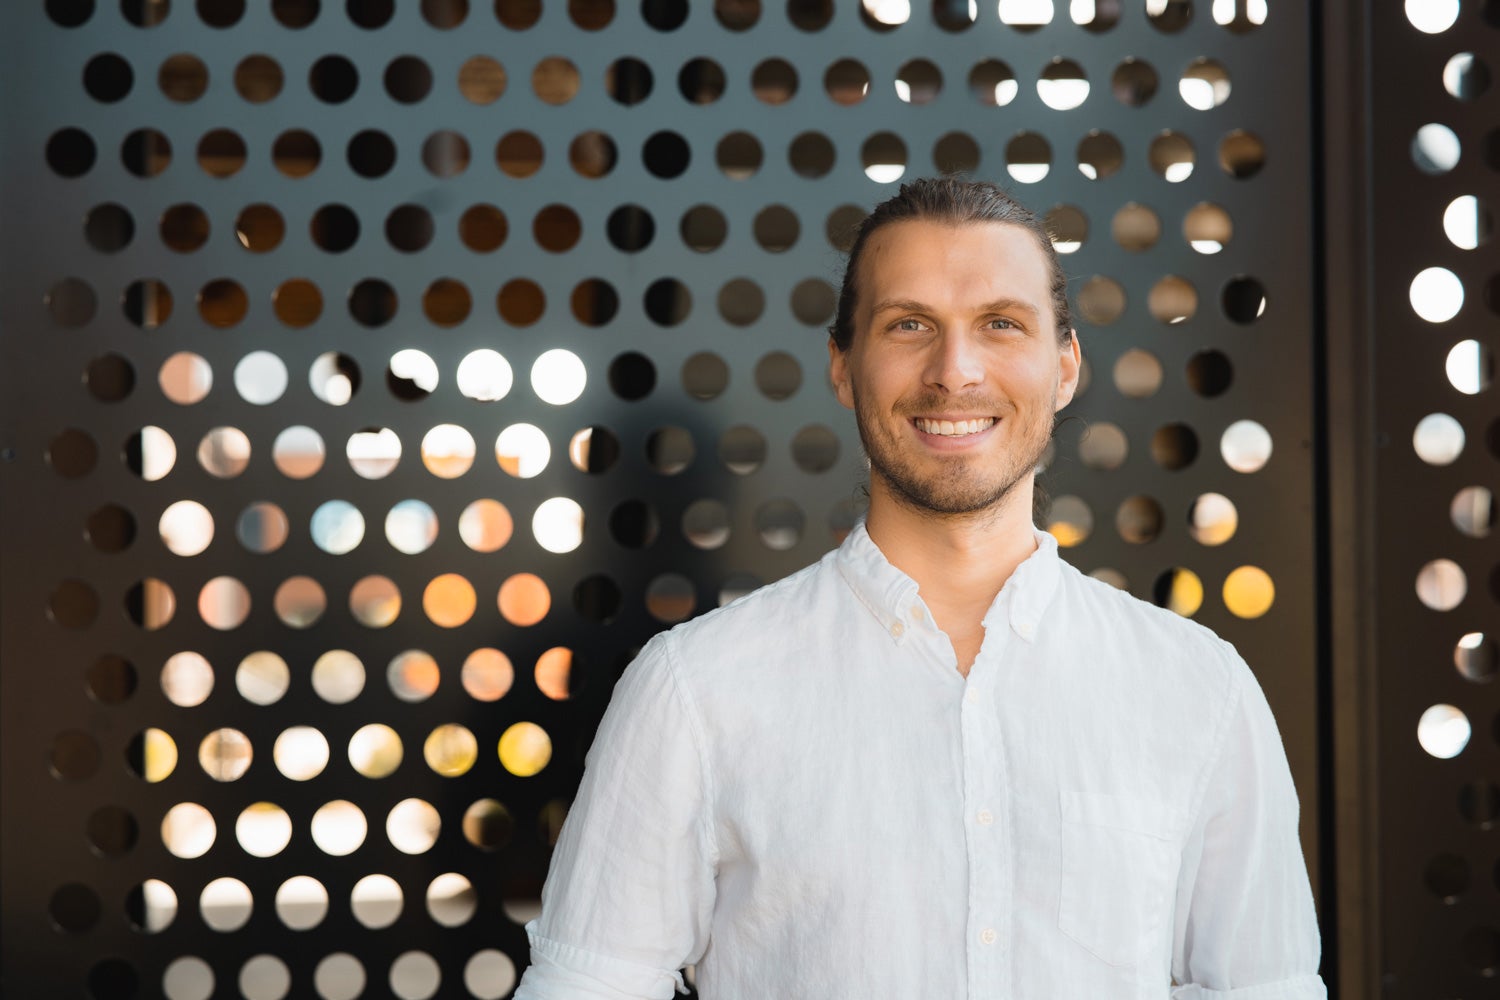 A man in a white button up shirt stands smiling in front of a metal wall